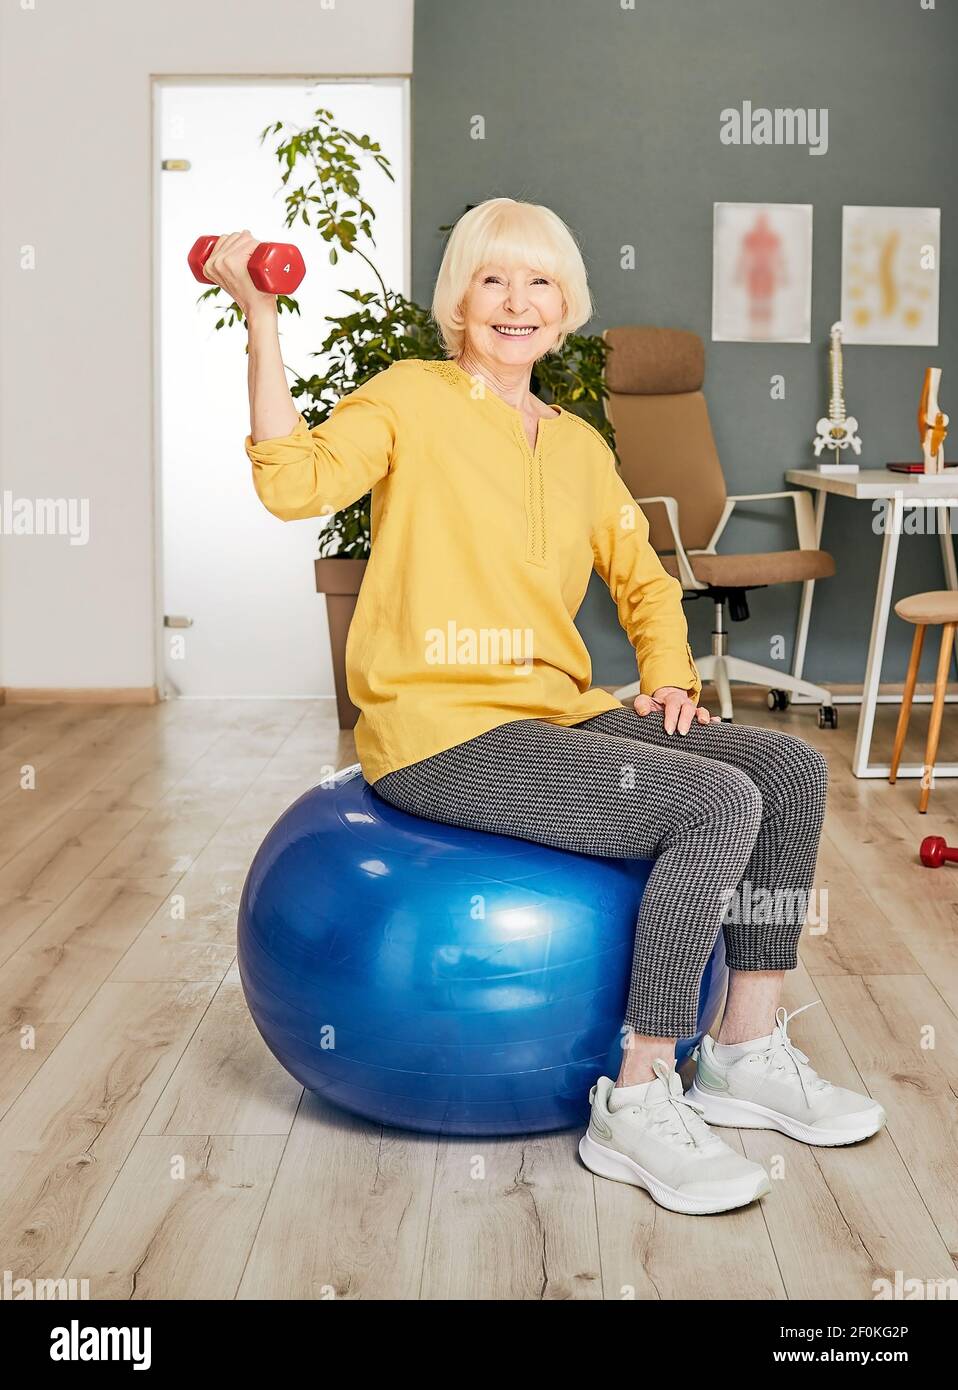 Senior woman with a dumbbell in hand sitting on a fitness ball during exercise therapy in a rehabilitation center Stock Photo